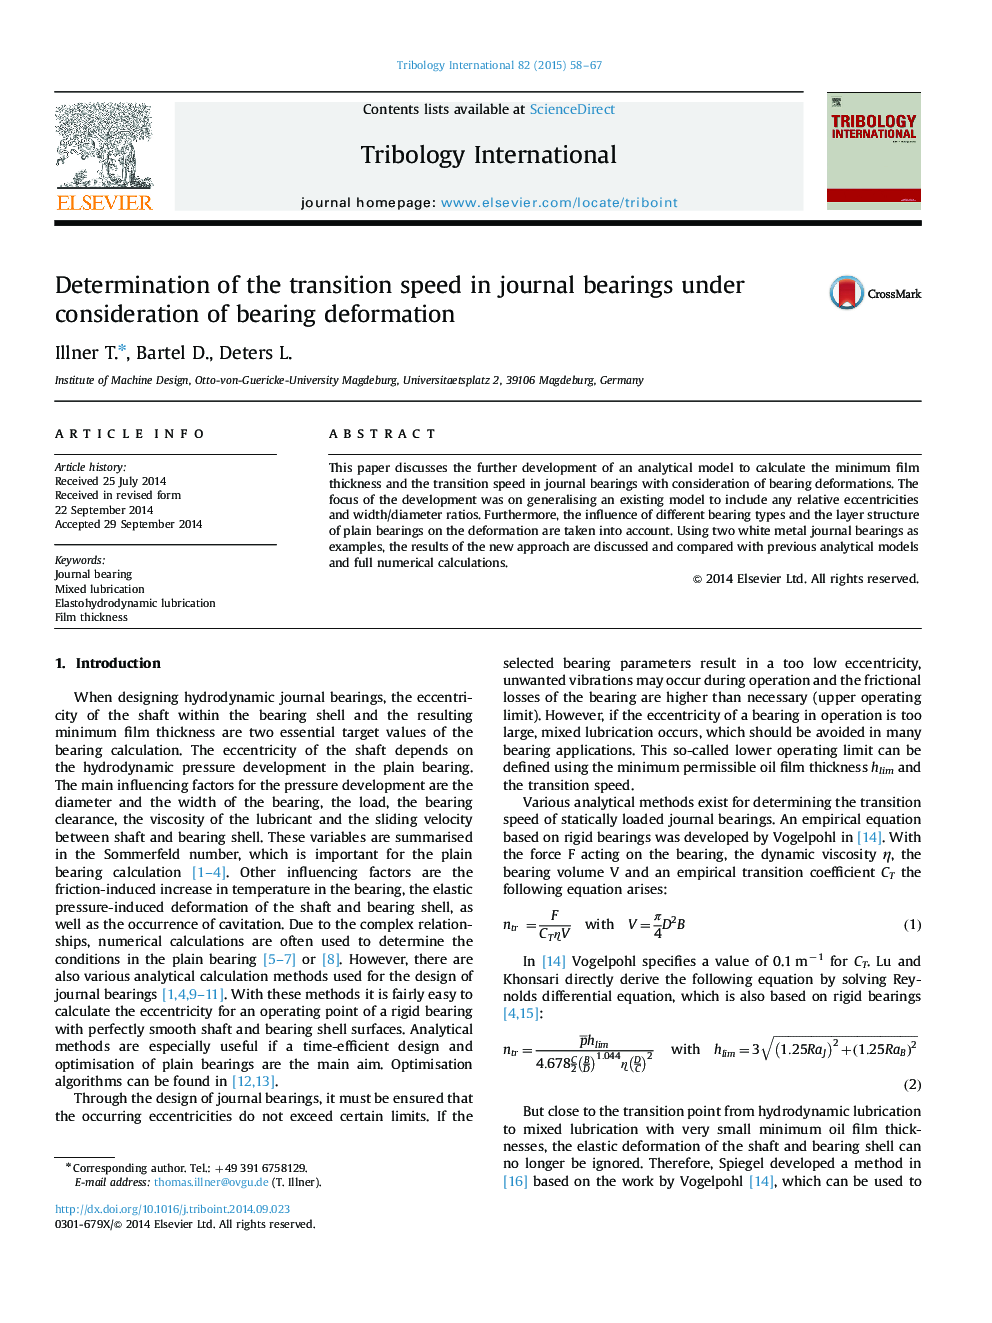 Determination of the transition speed in journal bearings under consideration of bearing deformation